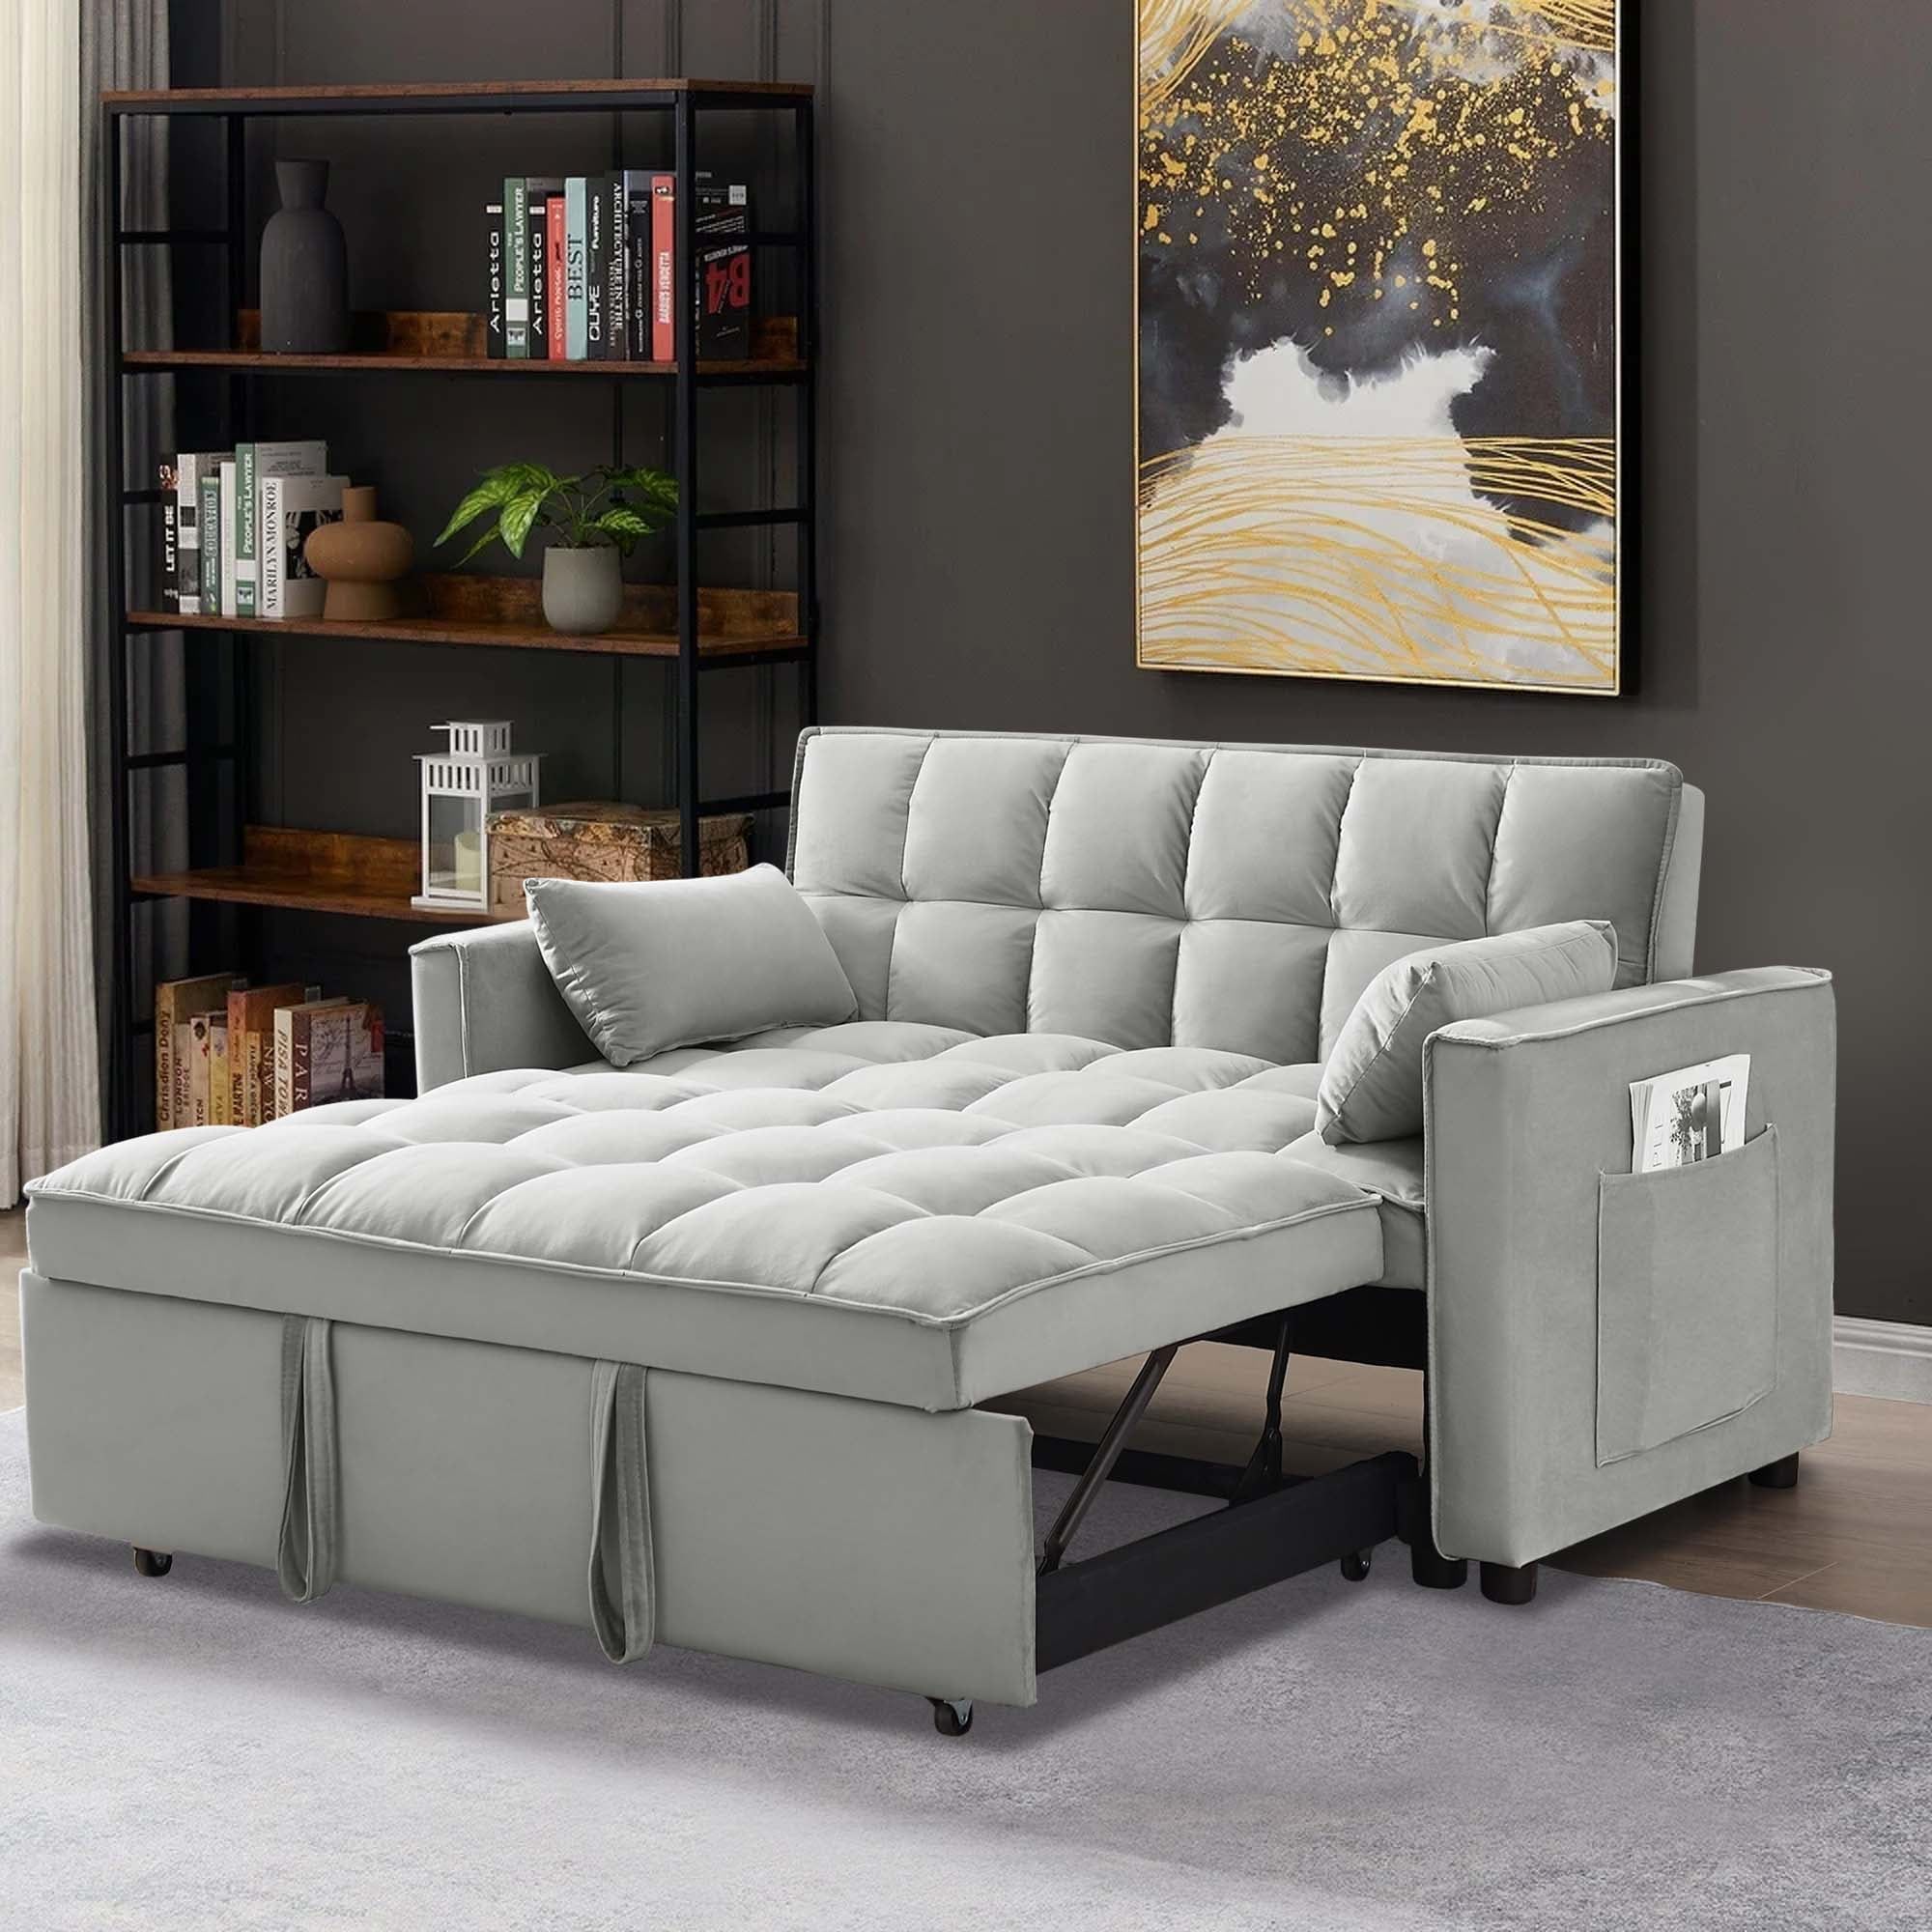 Aukfa Upholstered Sleeper Sofa Pull Out Bed, Convertible Loveseat Sofa Couch  For Living Room – Gray – Walmart For 3 In 1 Gray Pull Out Sleeper Sofas (Photo 6 of 15)